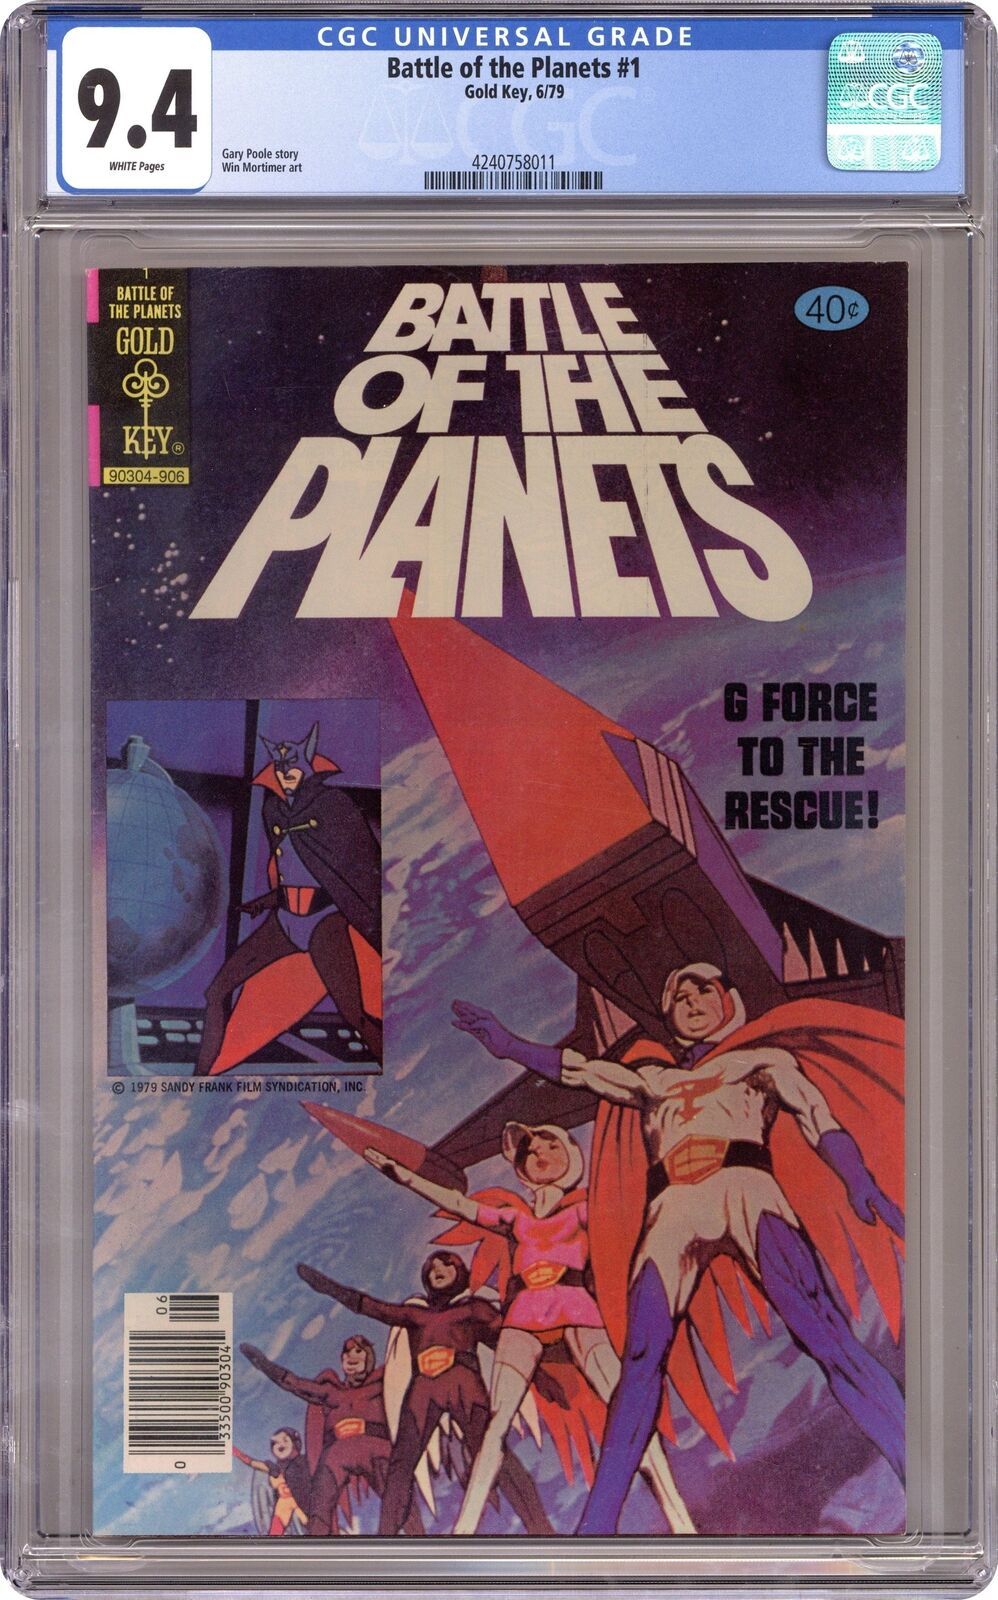 Battle of the Planets #1 CGC 9.4 1979 Gold Key 4240758011